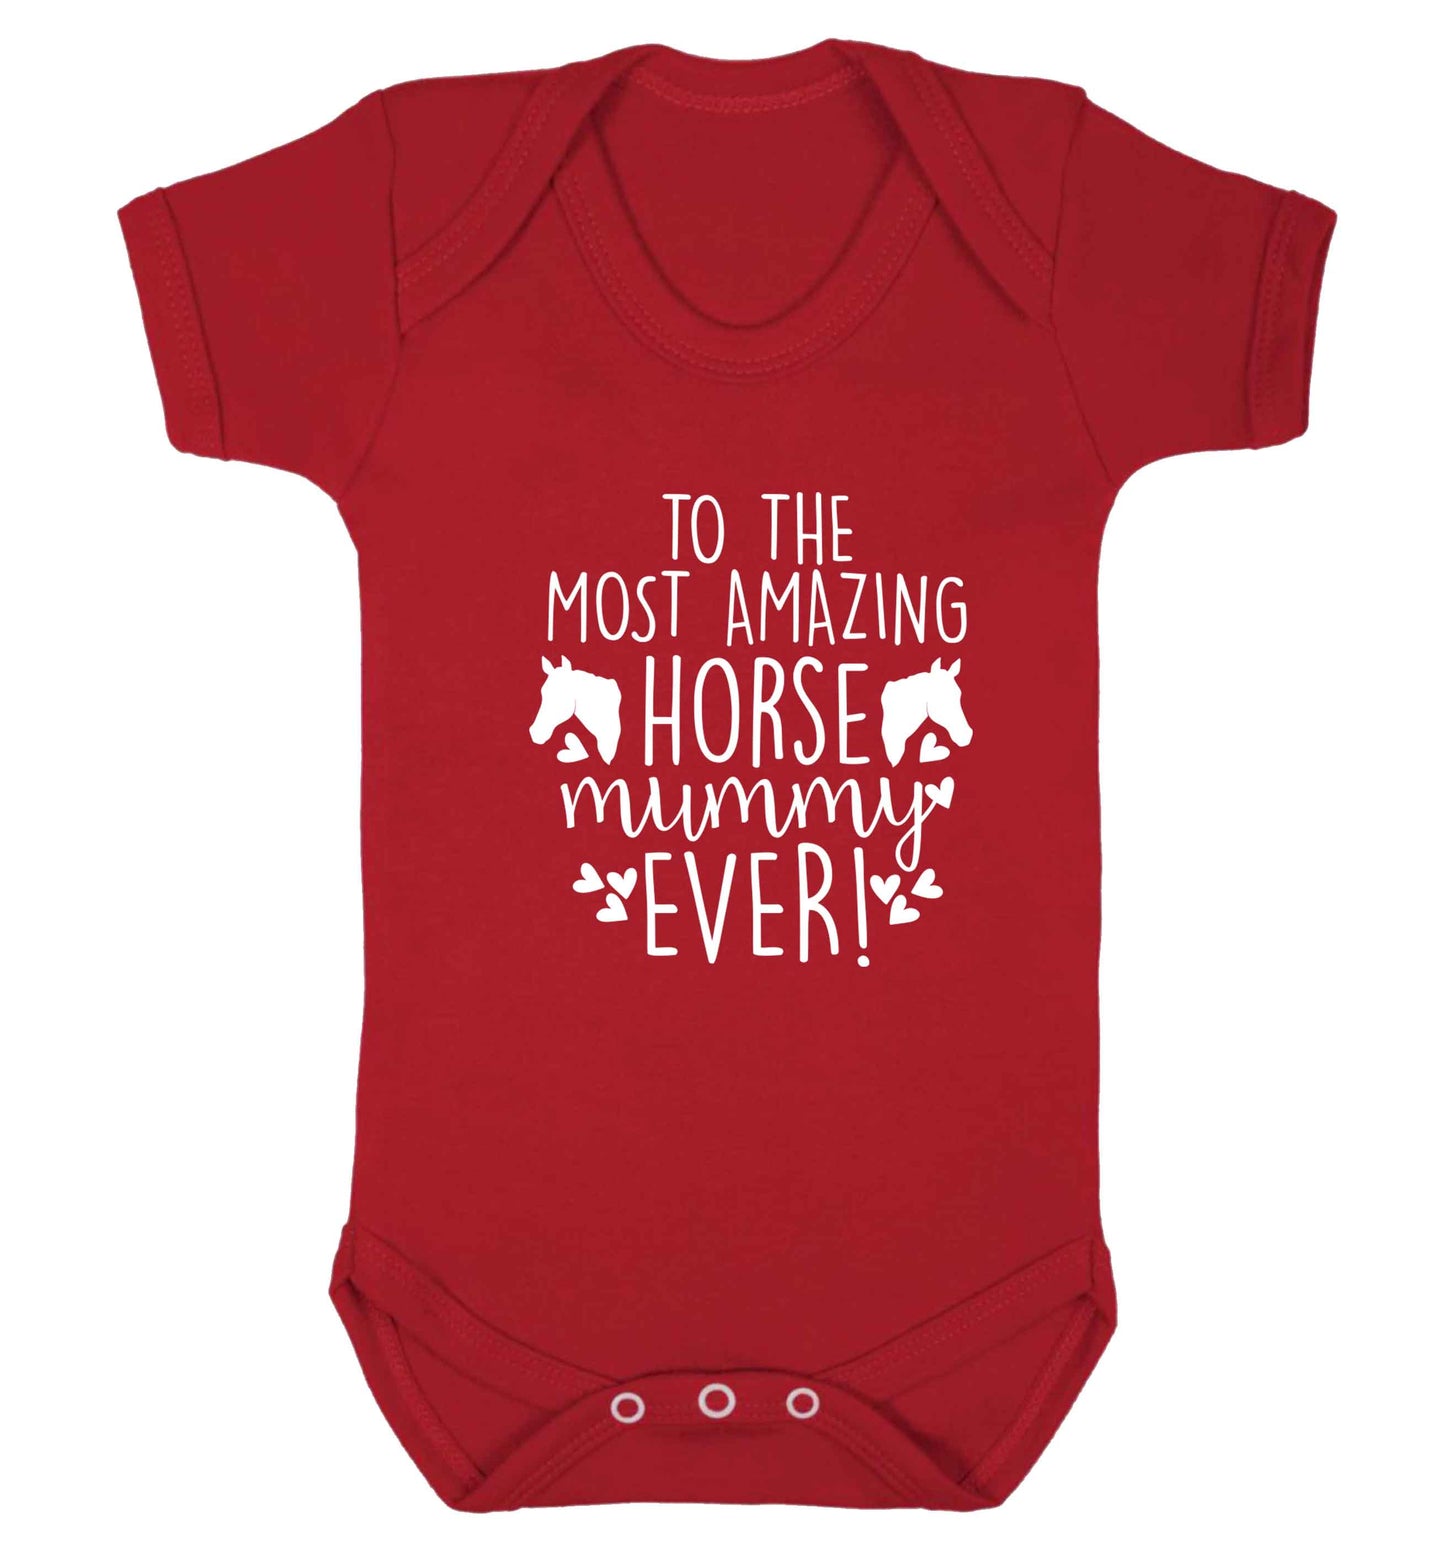 To the most amazing horse mummy ever! baby vest red 18-24 months